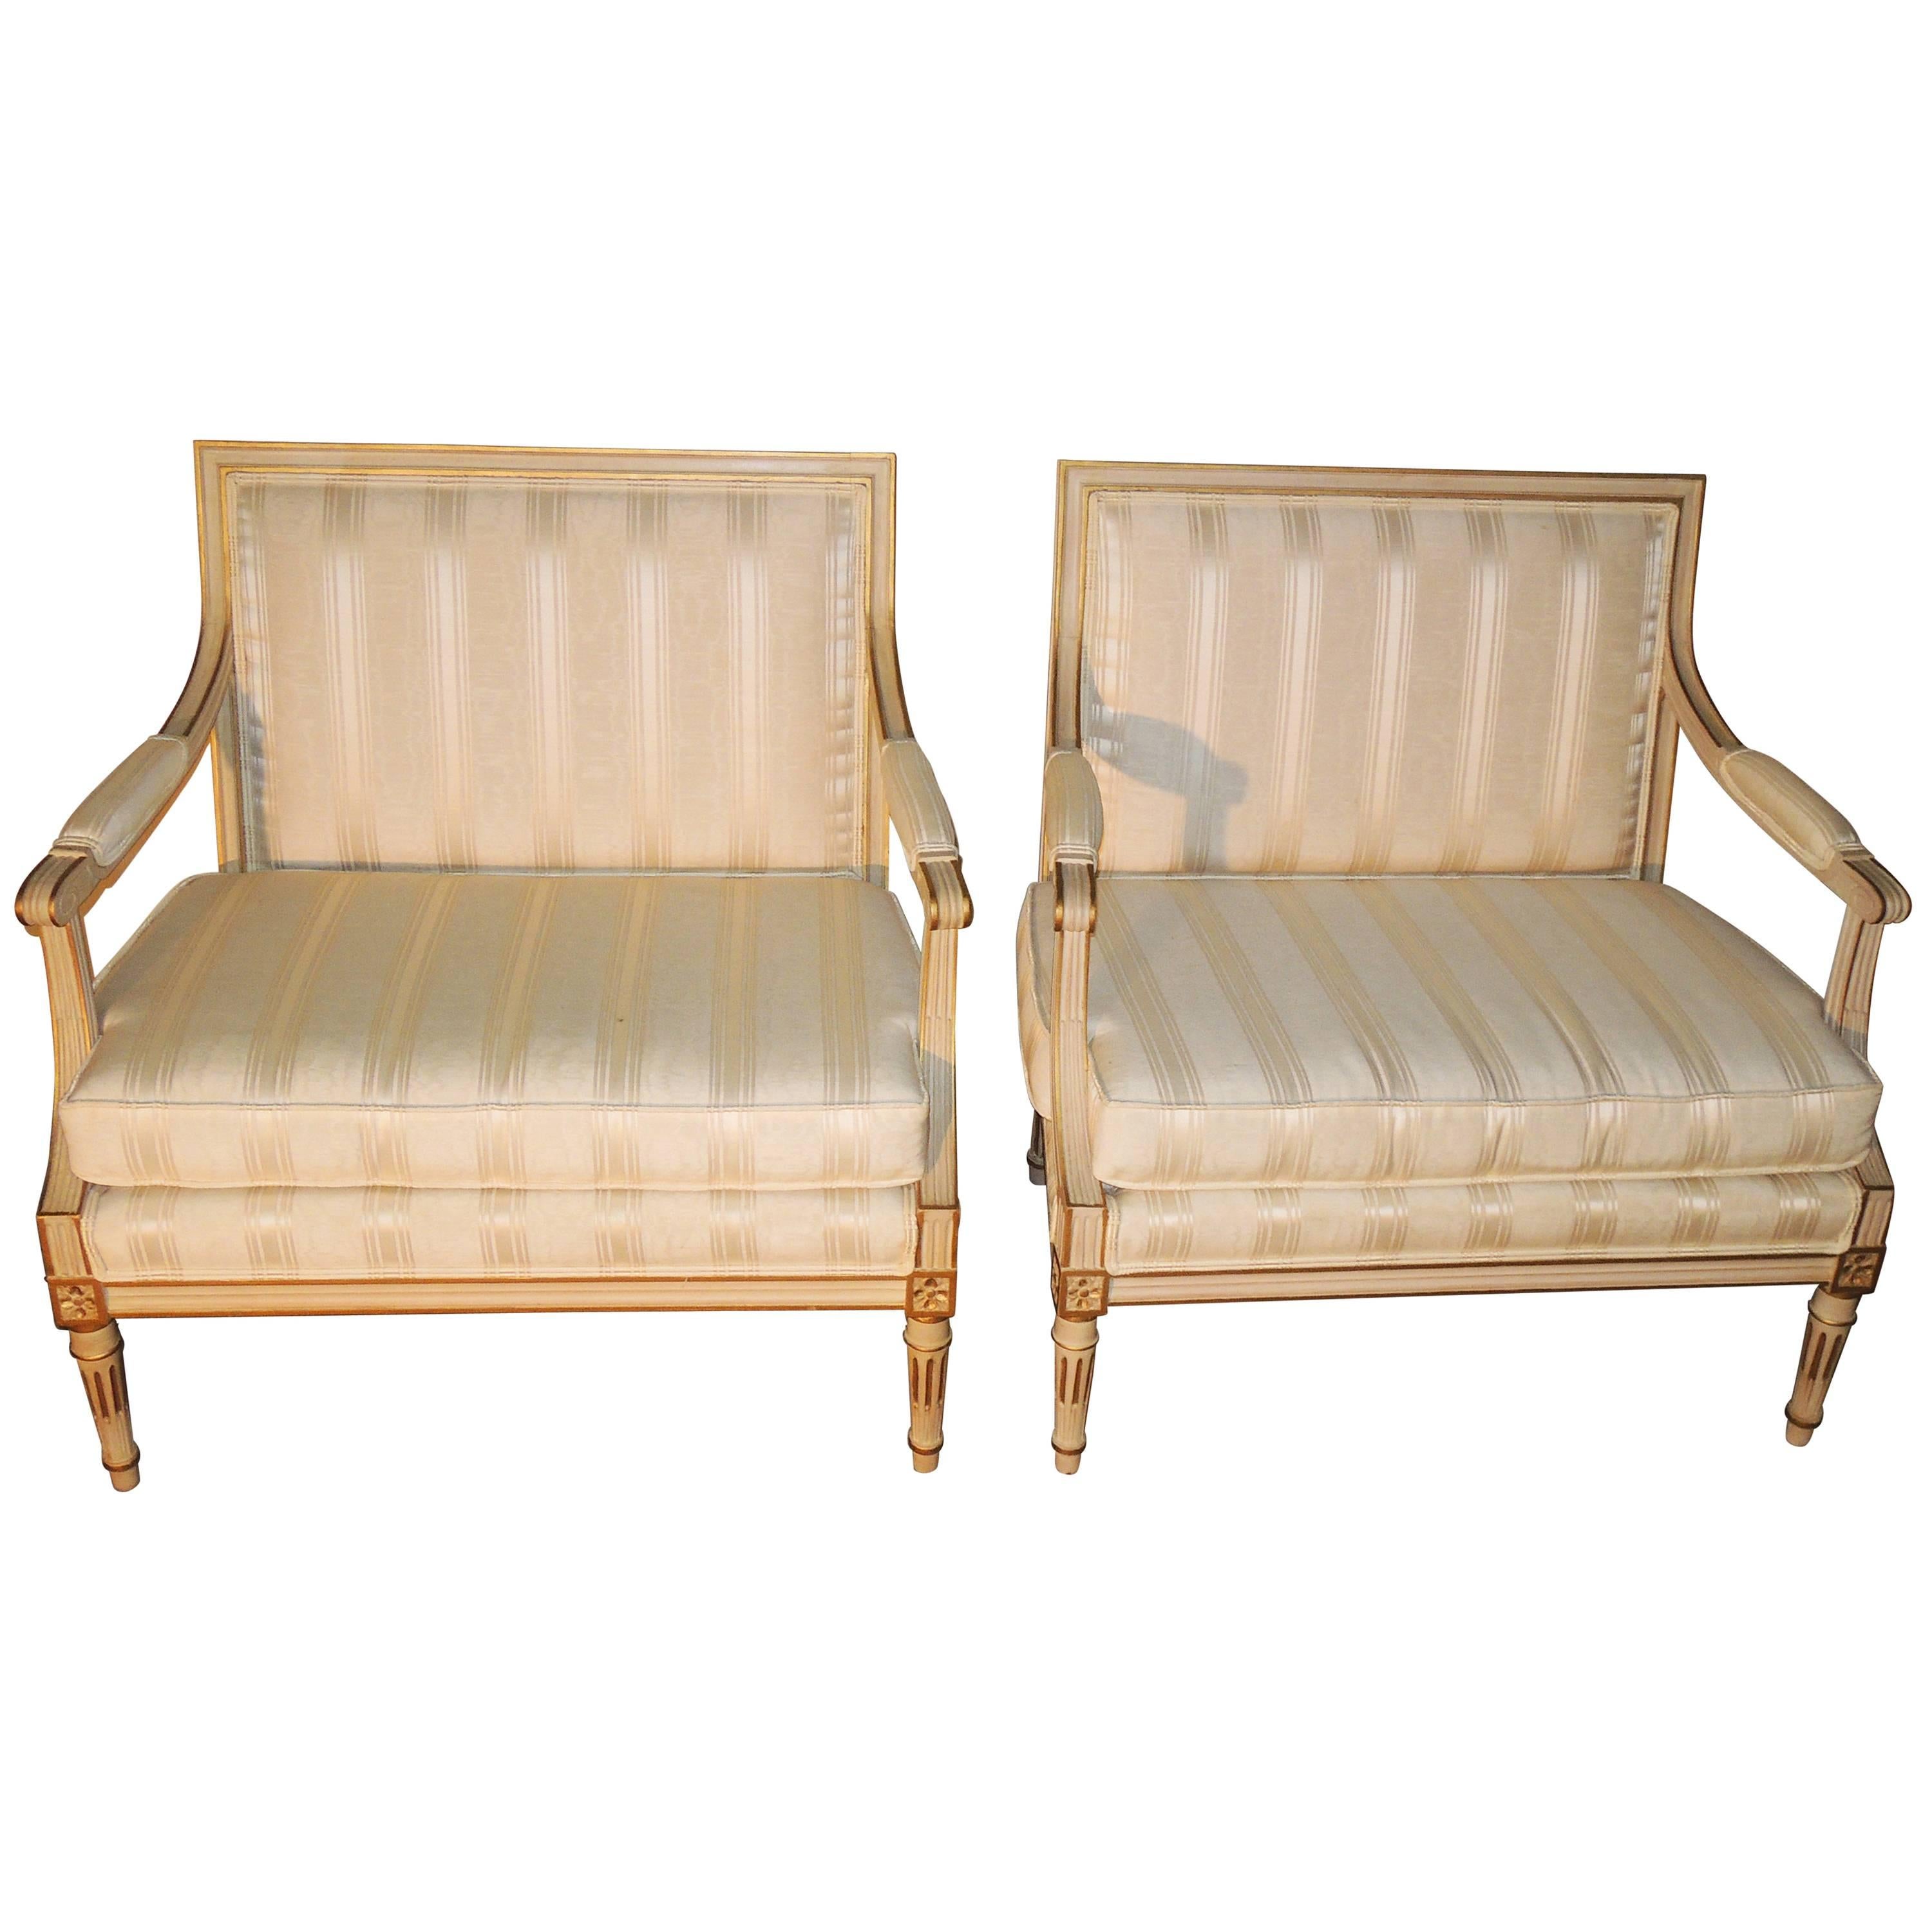 Pair of Louis XVI Style Marquise Armchairs